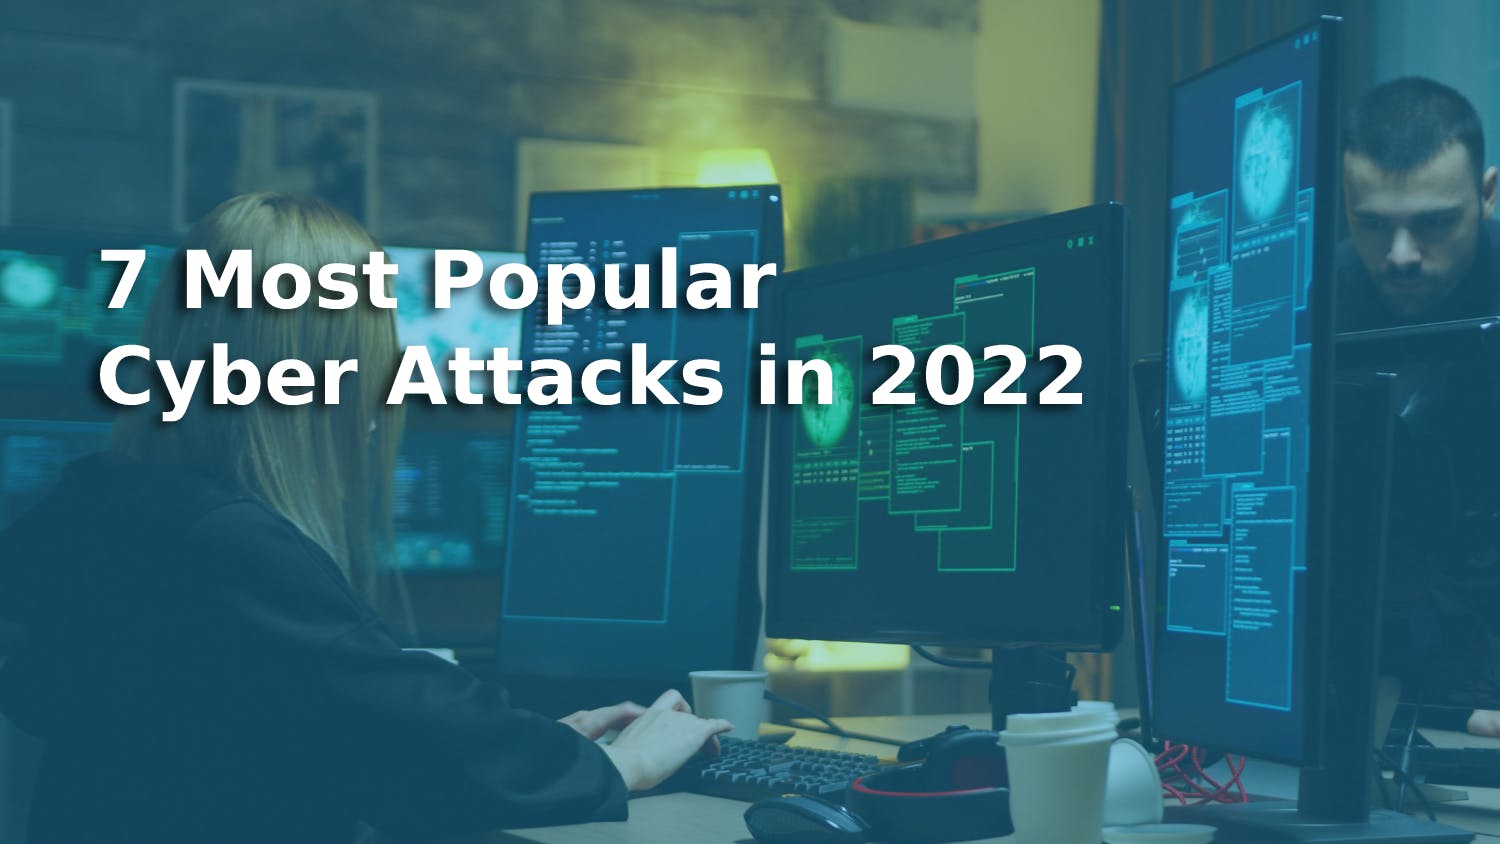 The Most Popular Cyber Attacks in 2022